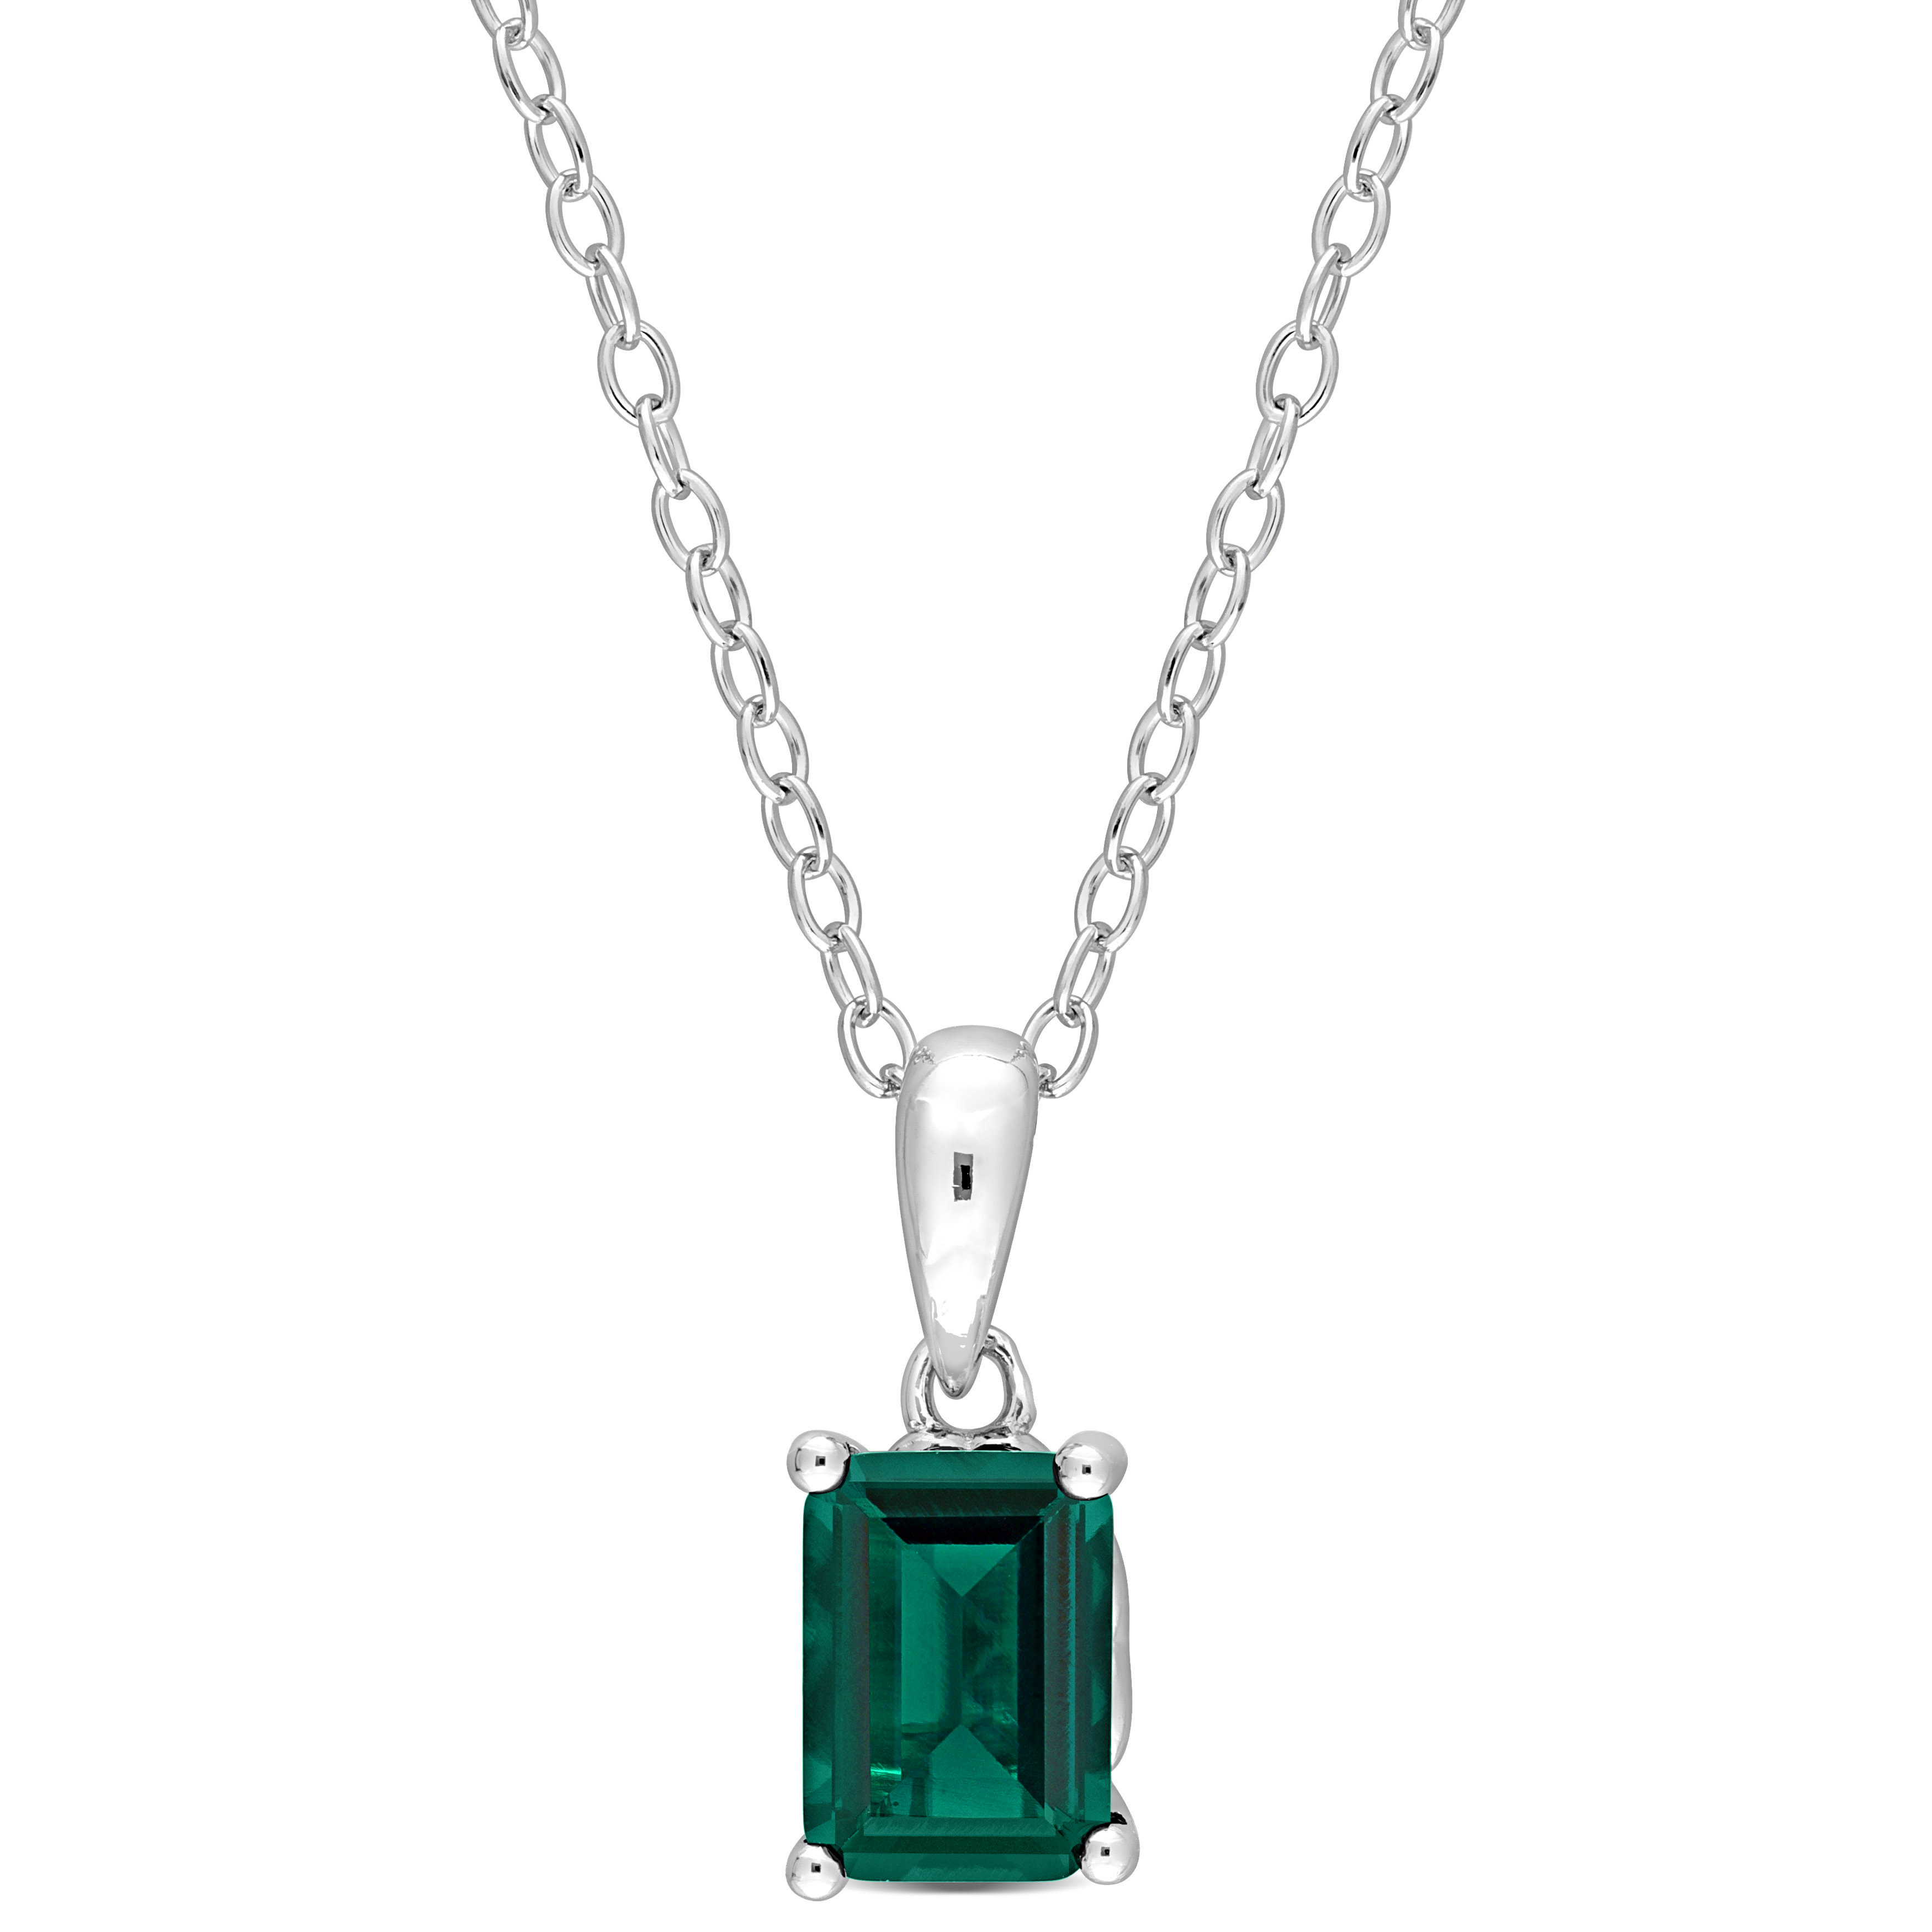 7/8 CT TGW Emerald Cut Created Emerald Solitaire Heart Design Pendant with Chain in Sterling Silver - 18 in.